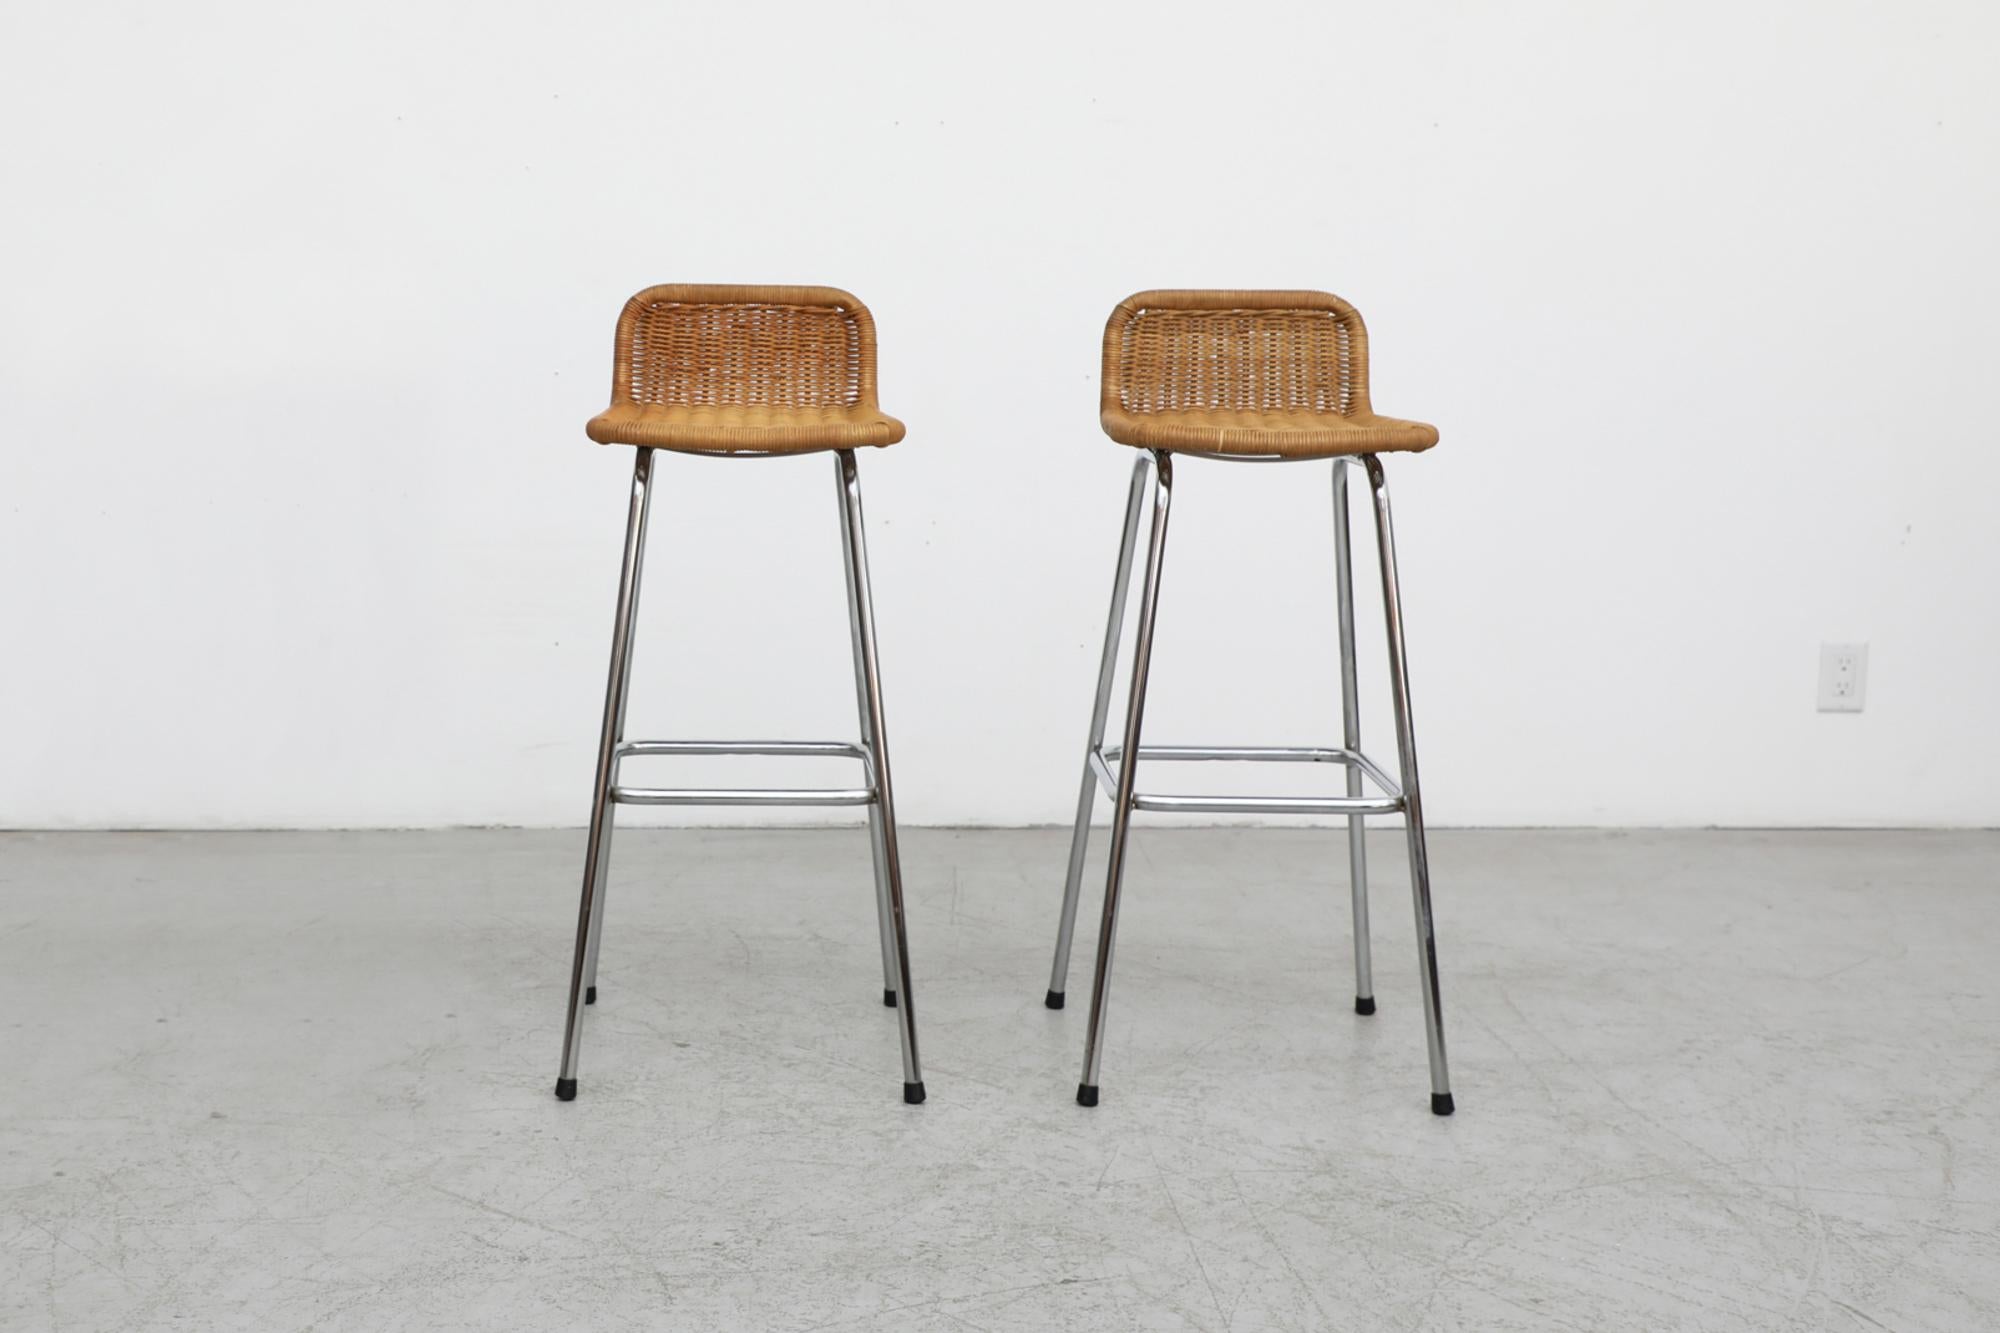 Pair of Charlotte Perriand style rattan bar stools by Dutch designer Dirk van Sliedregt for Rohe Noordwolde with low, rounded seat backs and chrome tubular frames. Seat height is 30